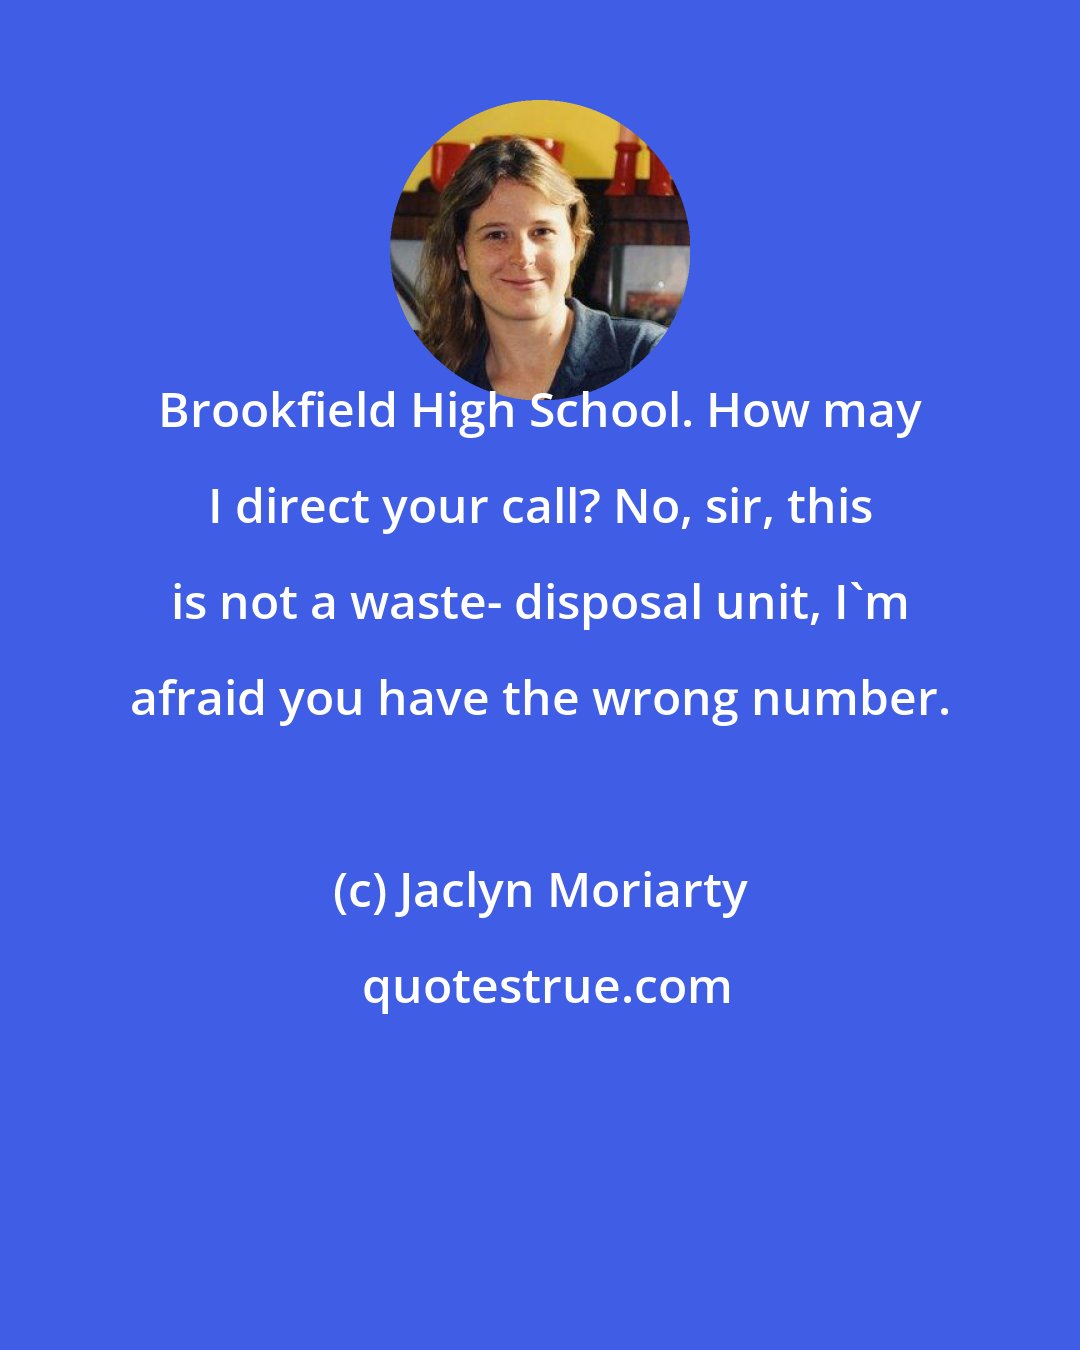 Jaclyn Moriarty: Brookfield High School. How may I direct your call? No, sir, this is not a waste- disposal unit, I'm afraid you have the wrong number.